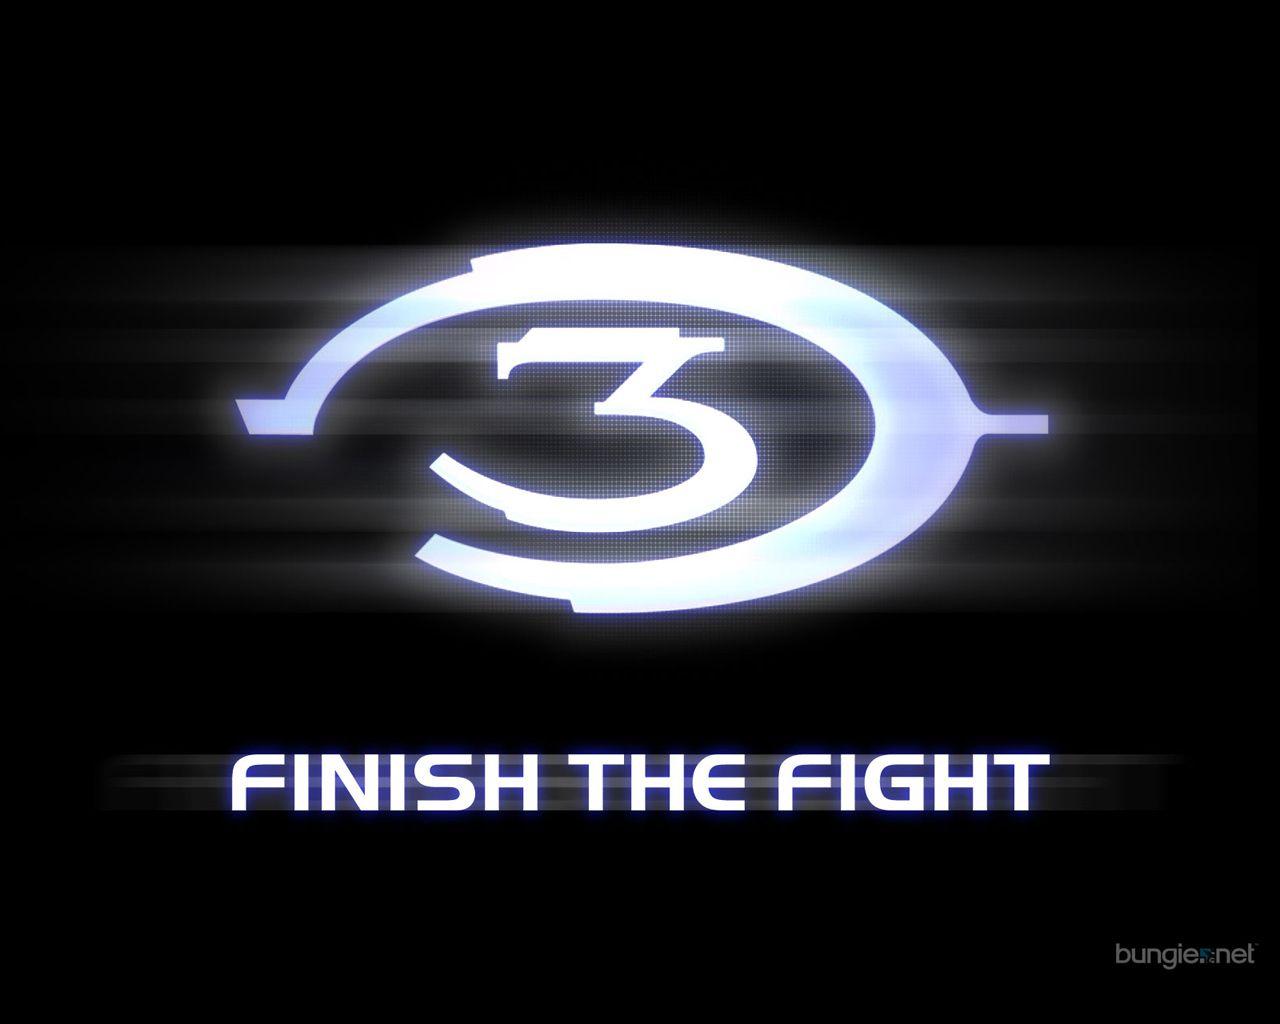 Download the Finish The Fight Wallpaper, Finish The Fight iPhone